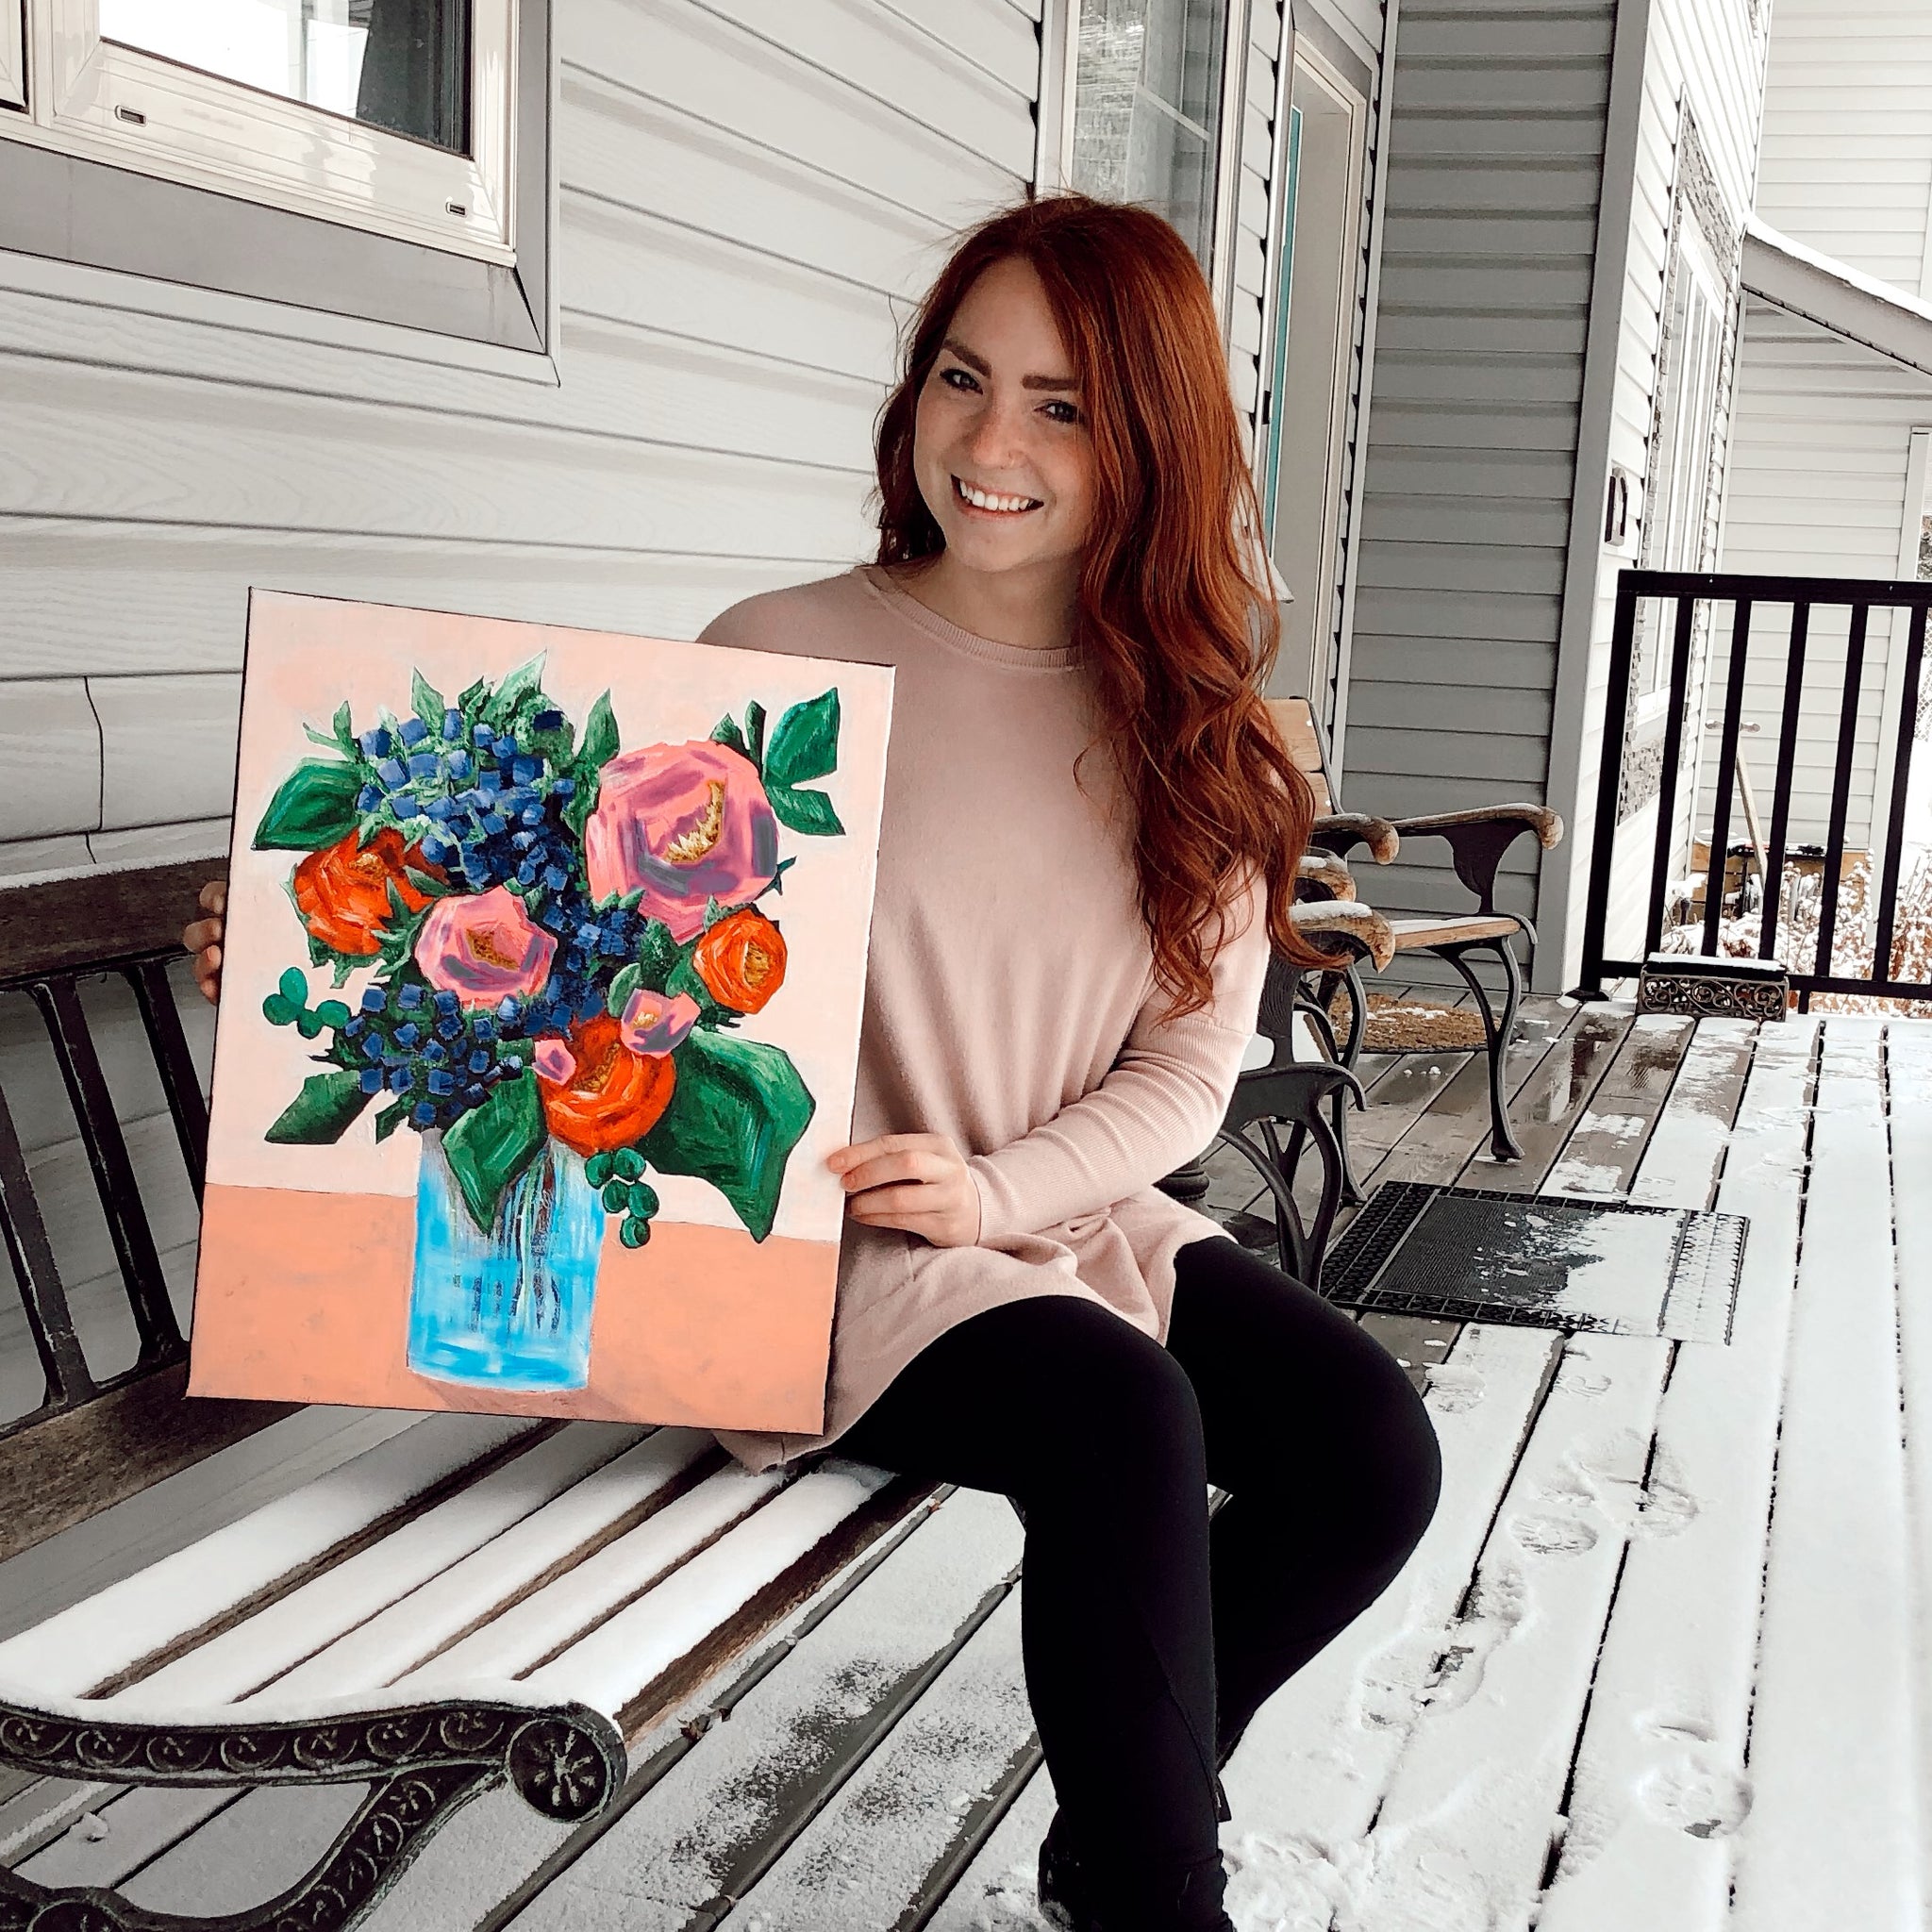 Bailey holding a painting she did of a jar of flowers.